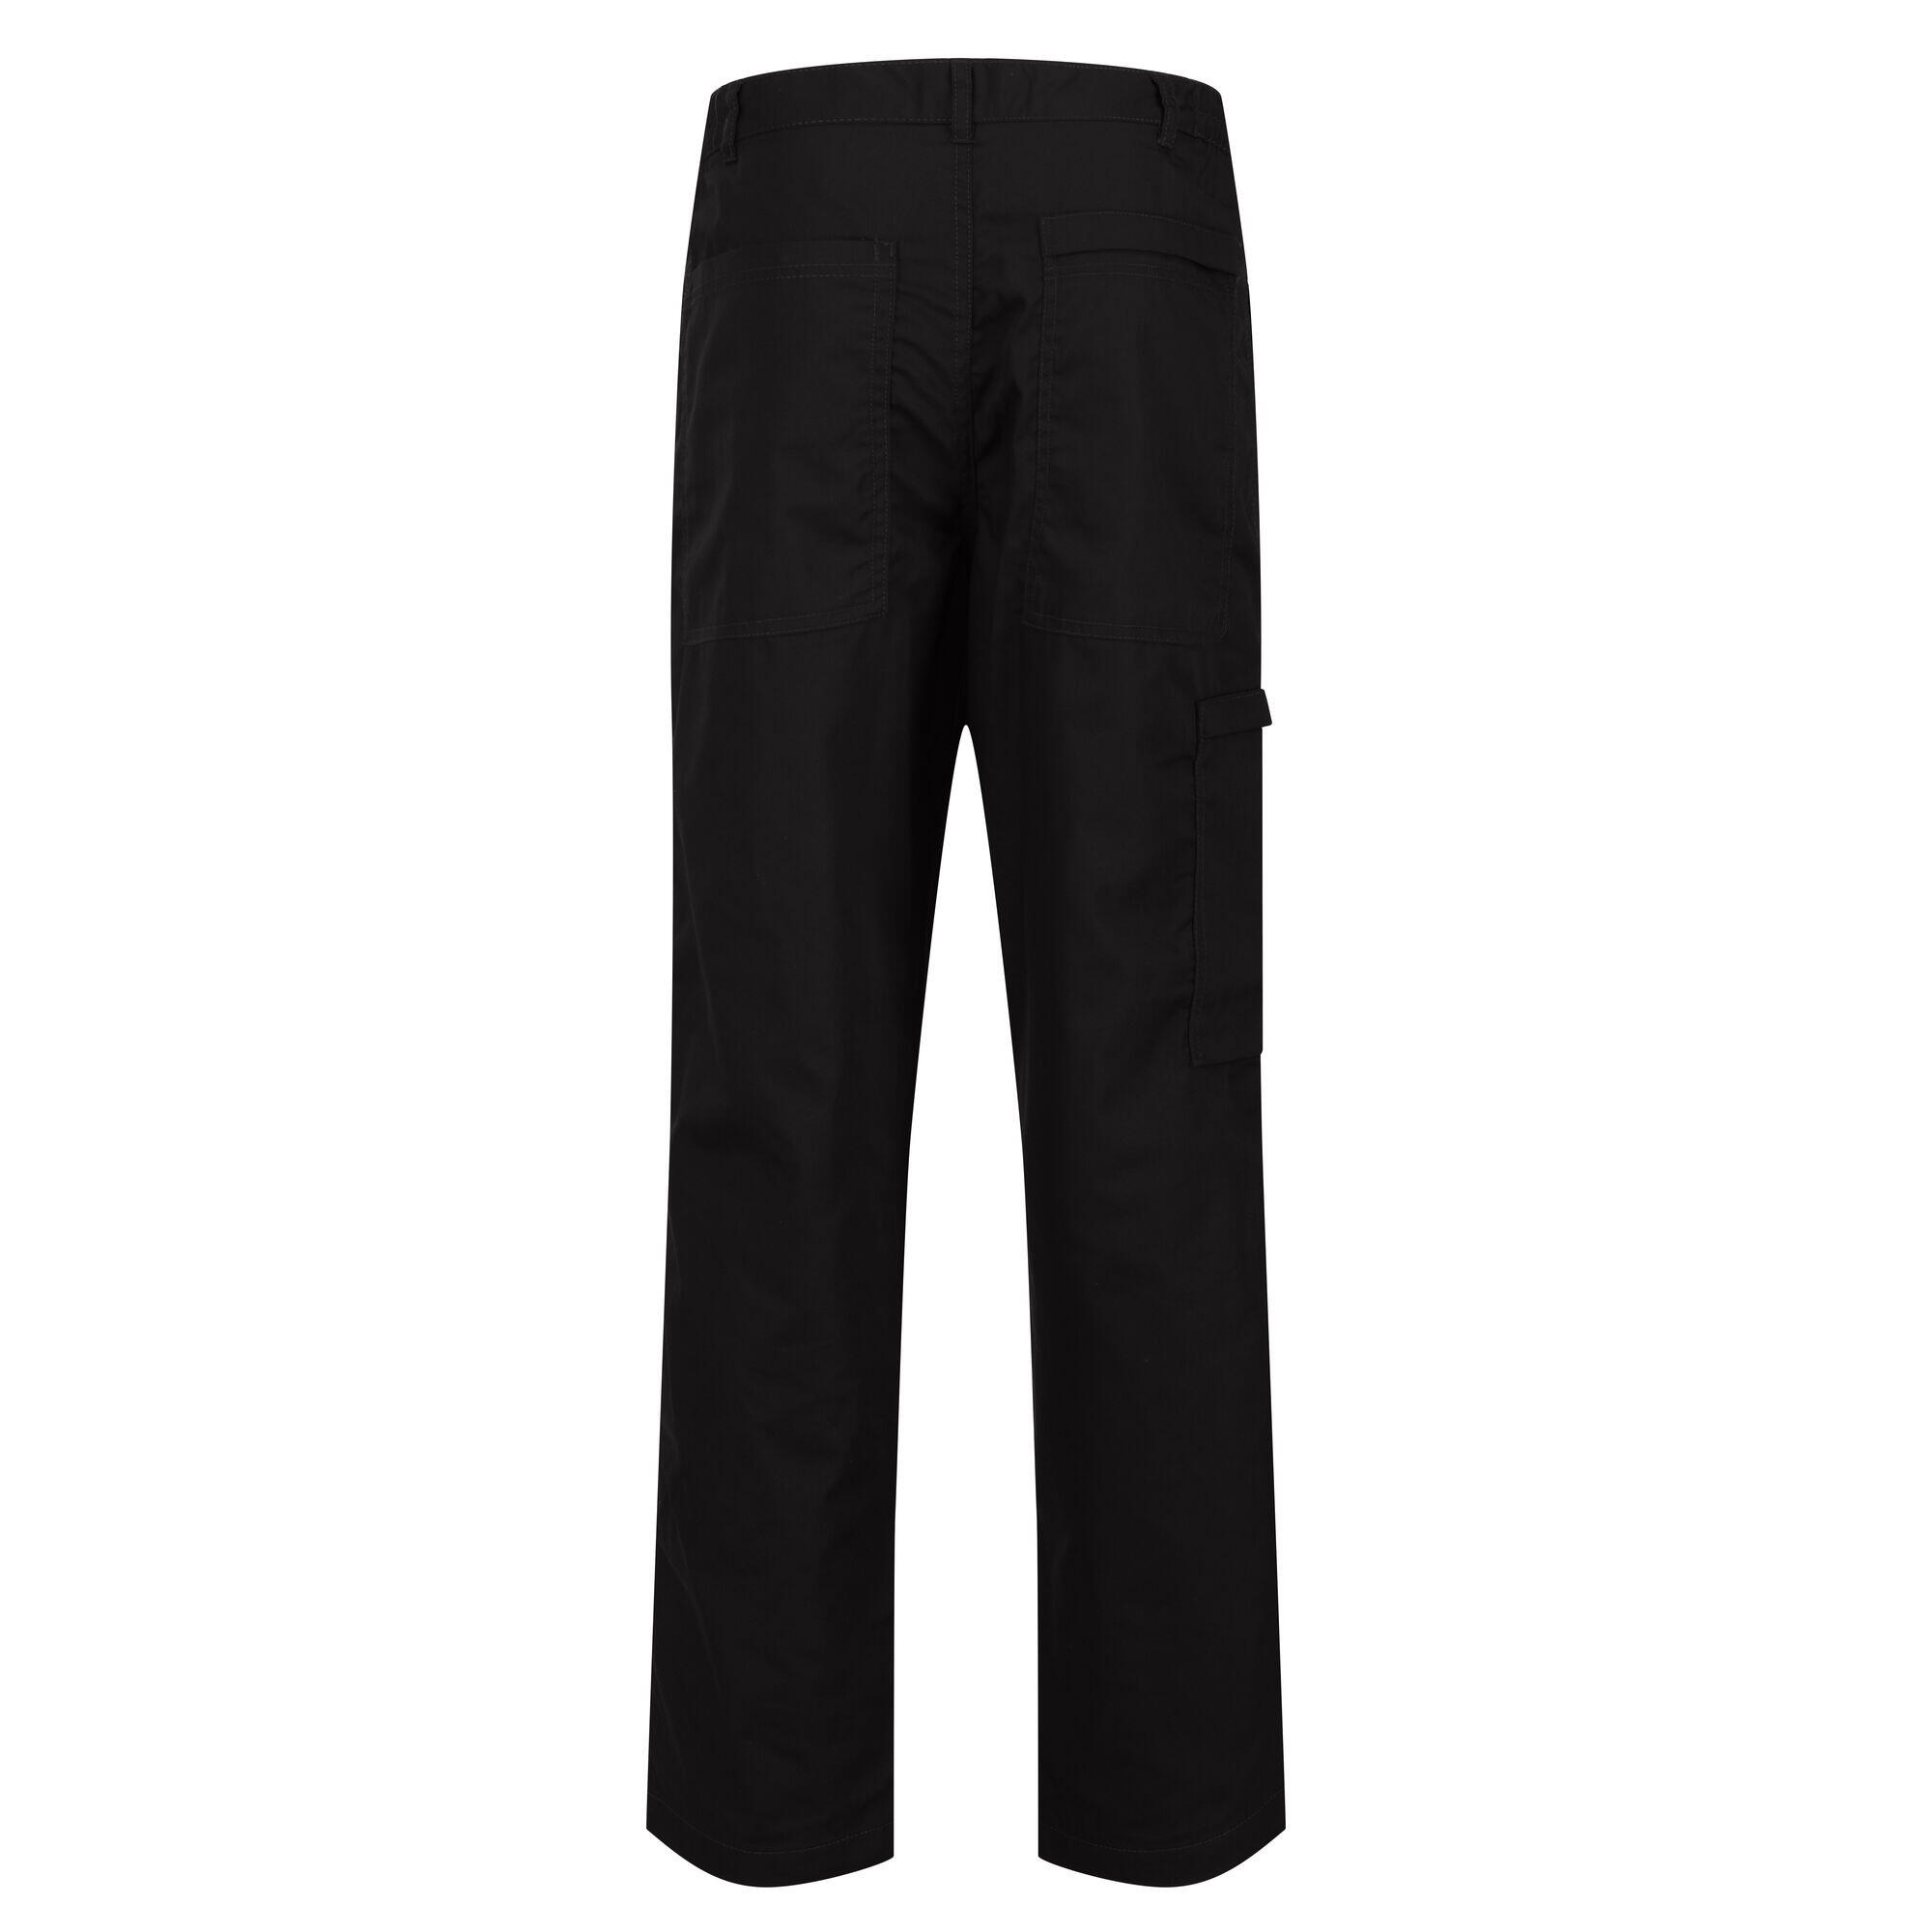 Mens Sports New Lined Action Trousers (Black) 2/5